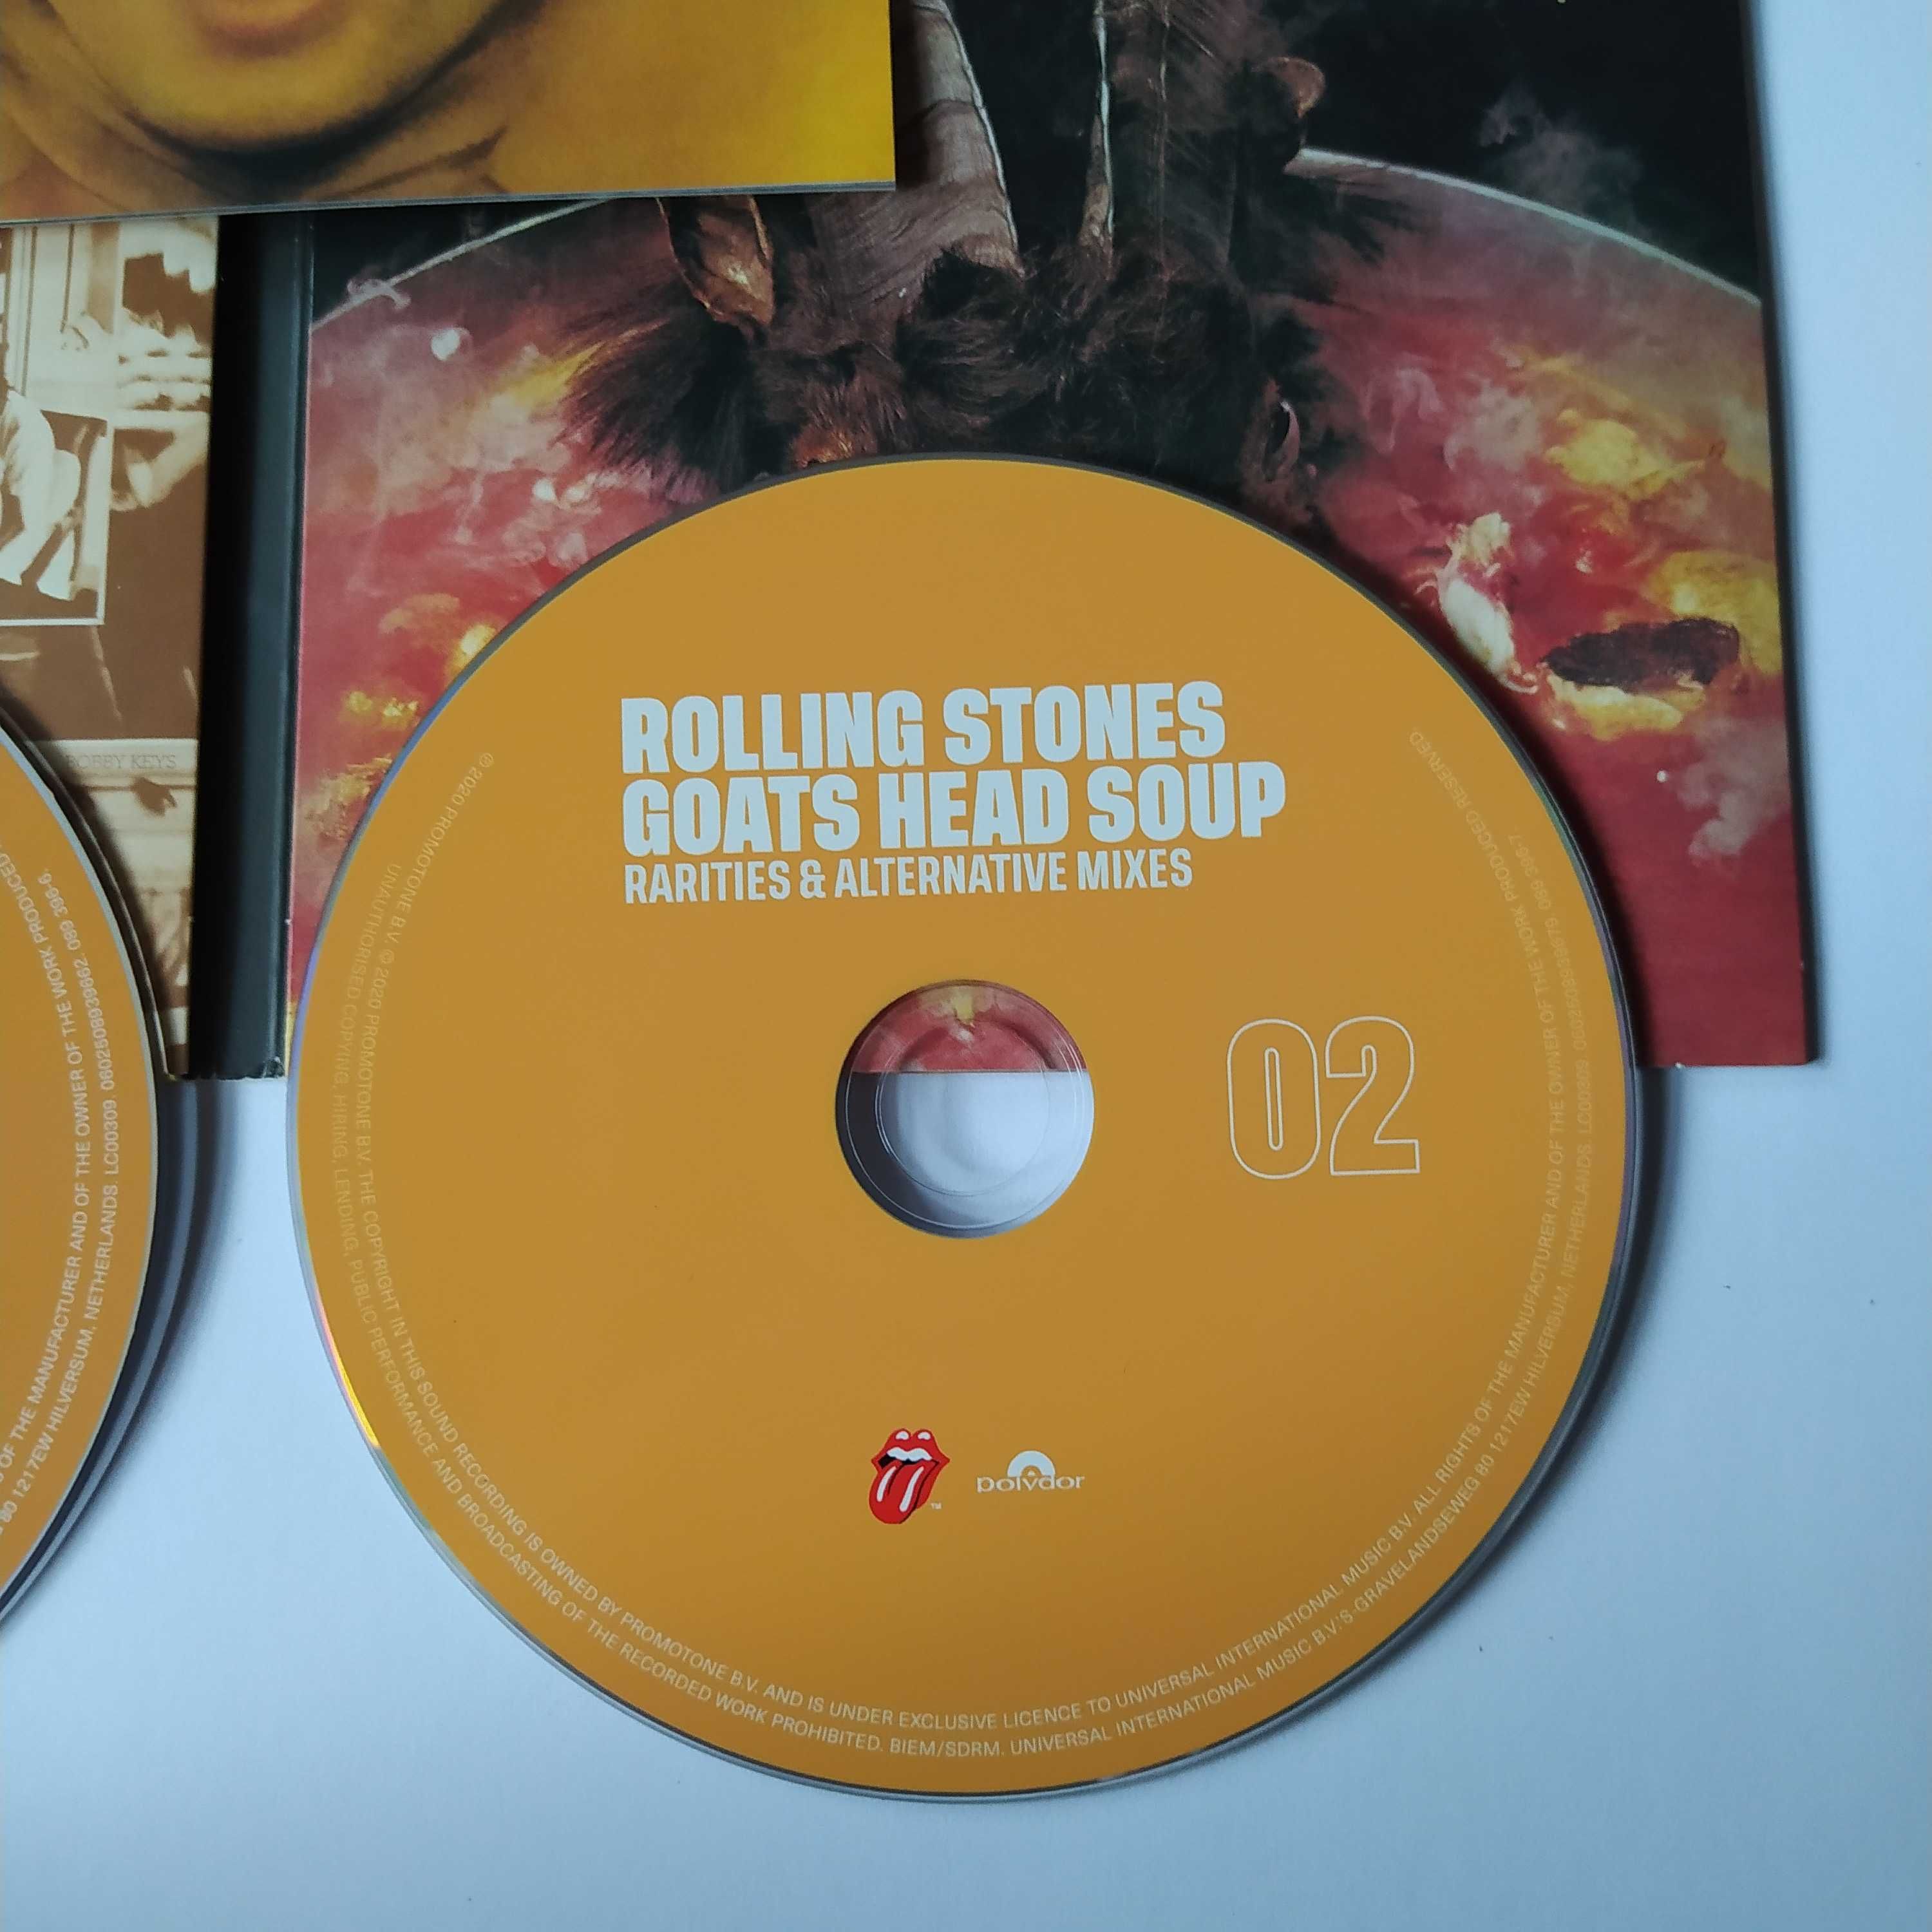 The Rolling Stones Goats Head Soup Deluxe 2 CD